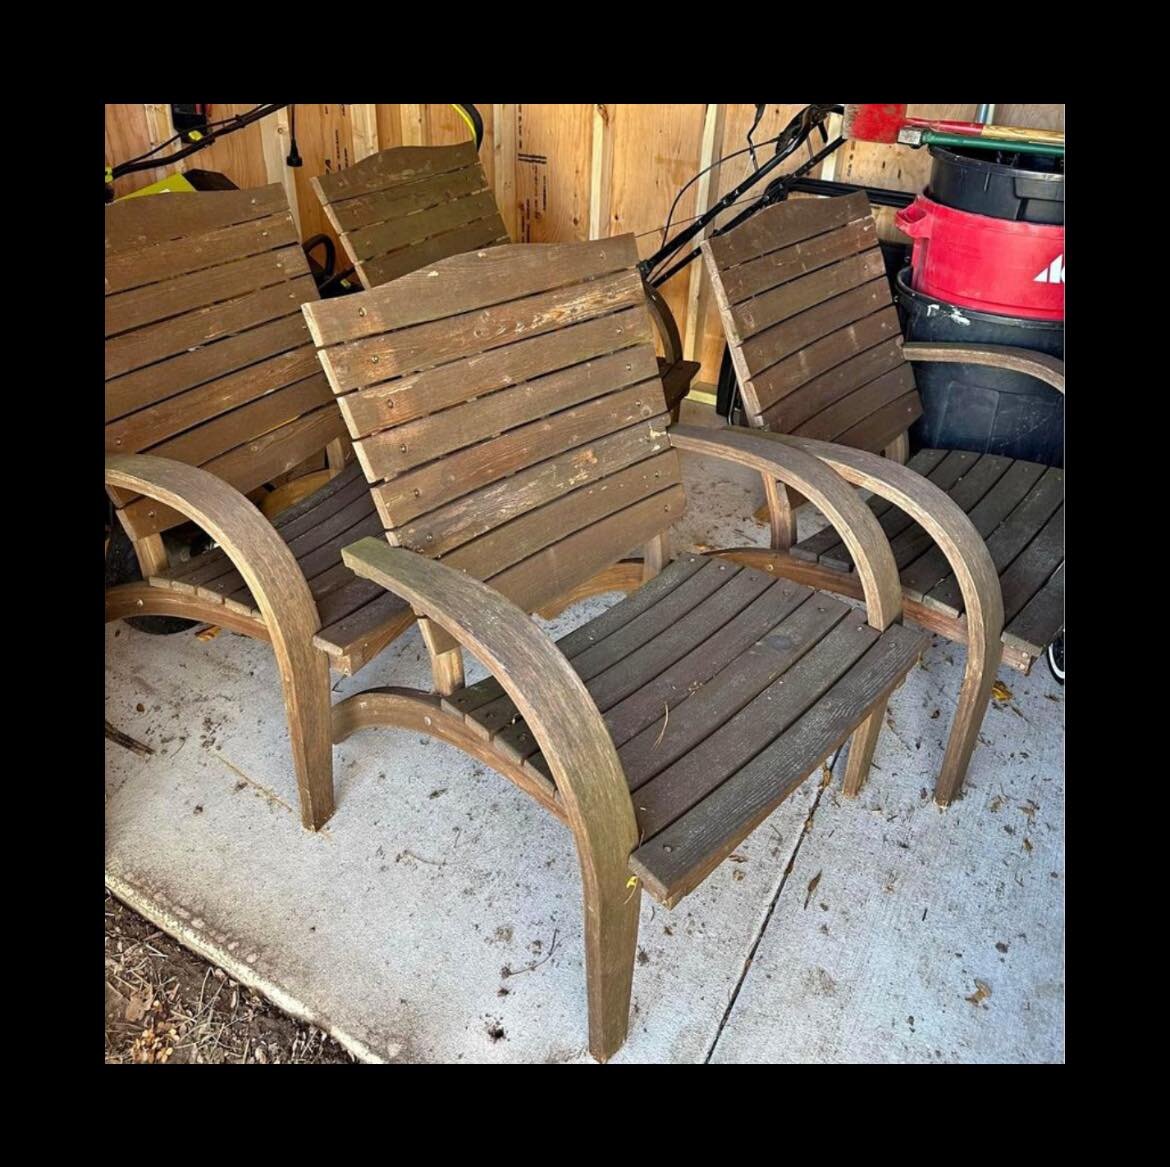 Help me decide&hellip; should I buy and flip these solid wood Adirondack chairs?!

Yes or no?